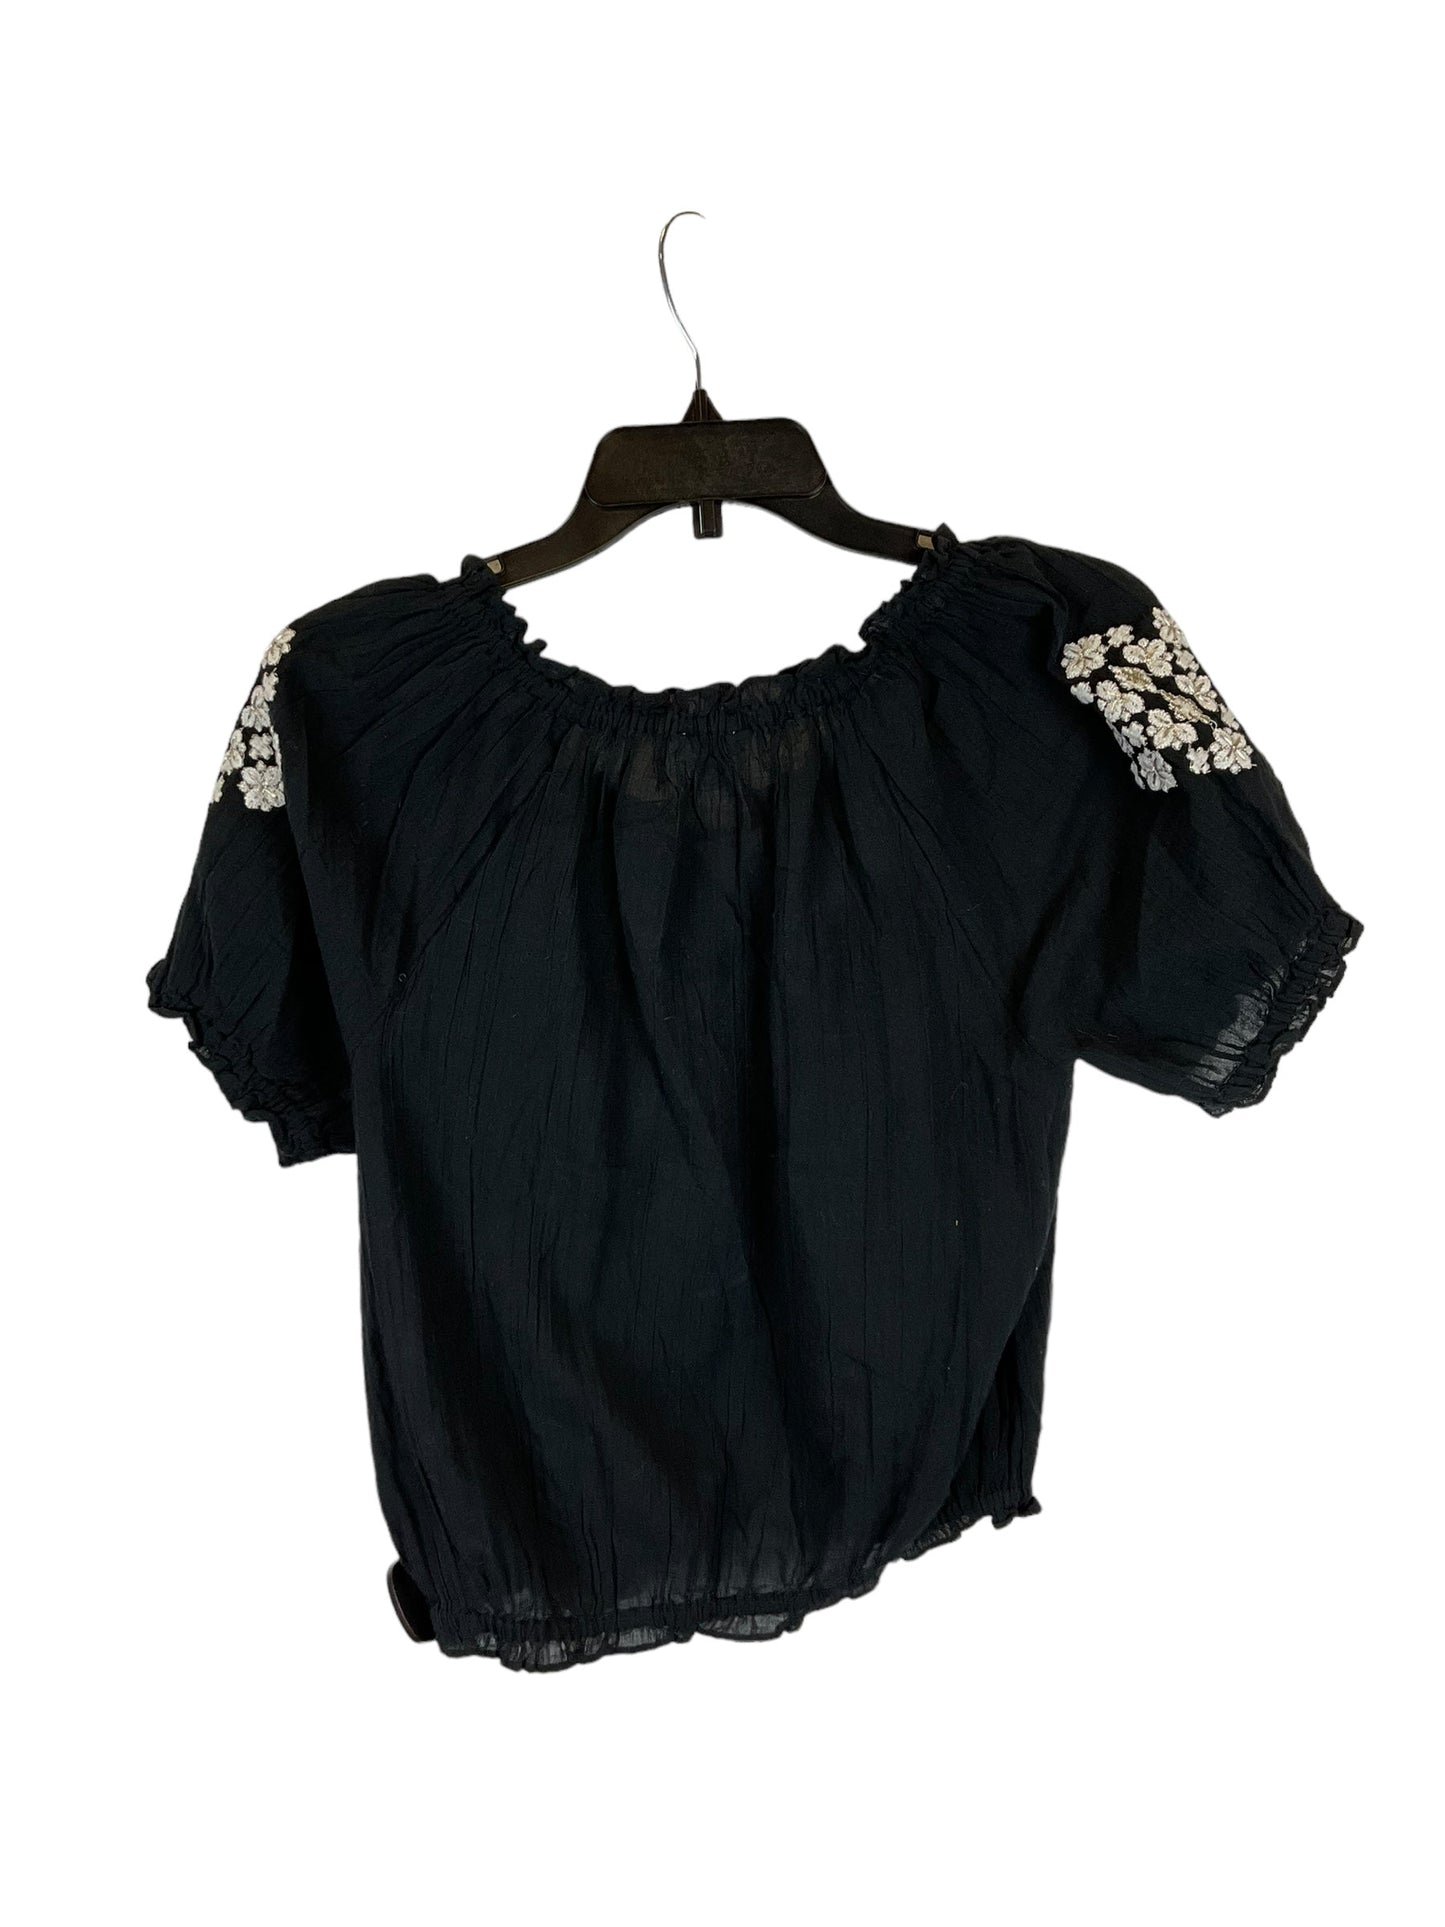 Black Top Short Sleeve Lucky Brand, Size S